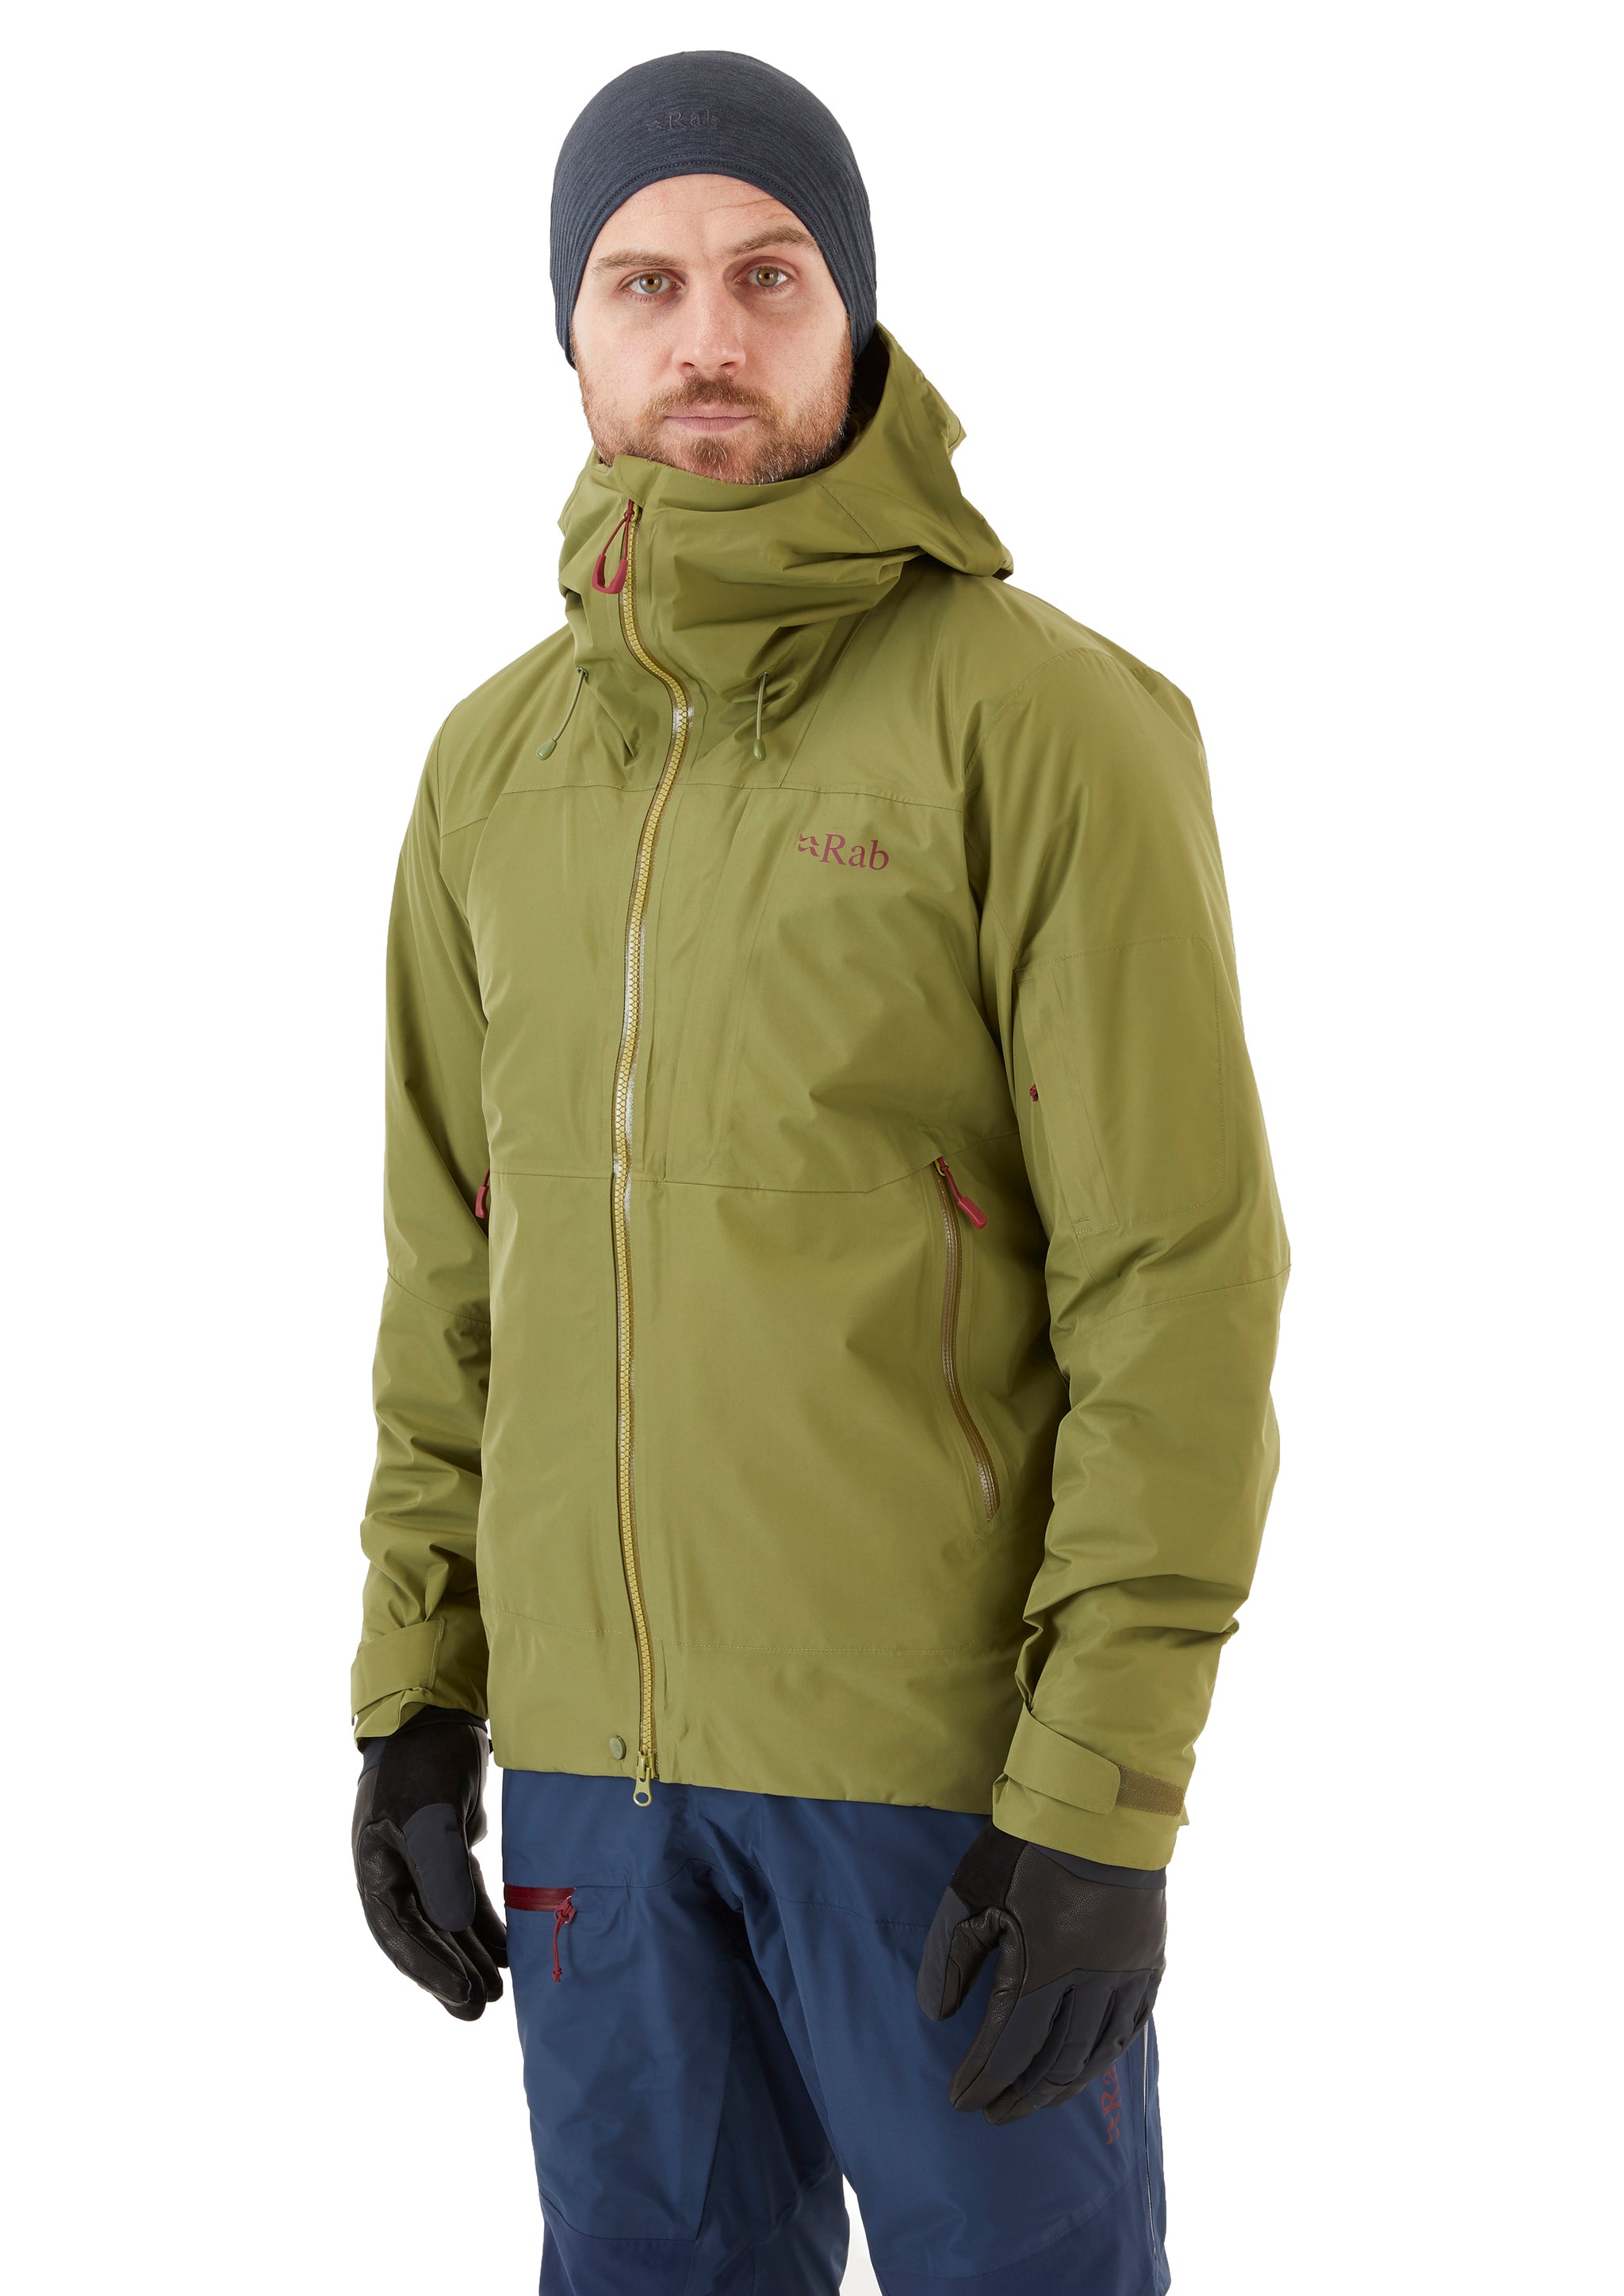 Rab Men's Khroma Volition Jacket - Outfitters Store